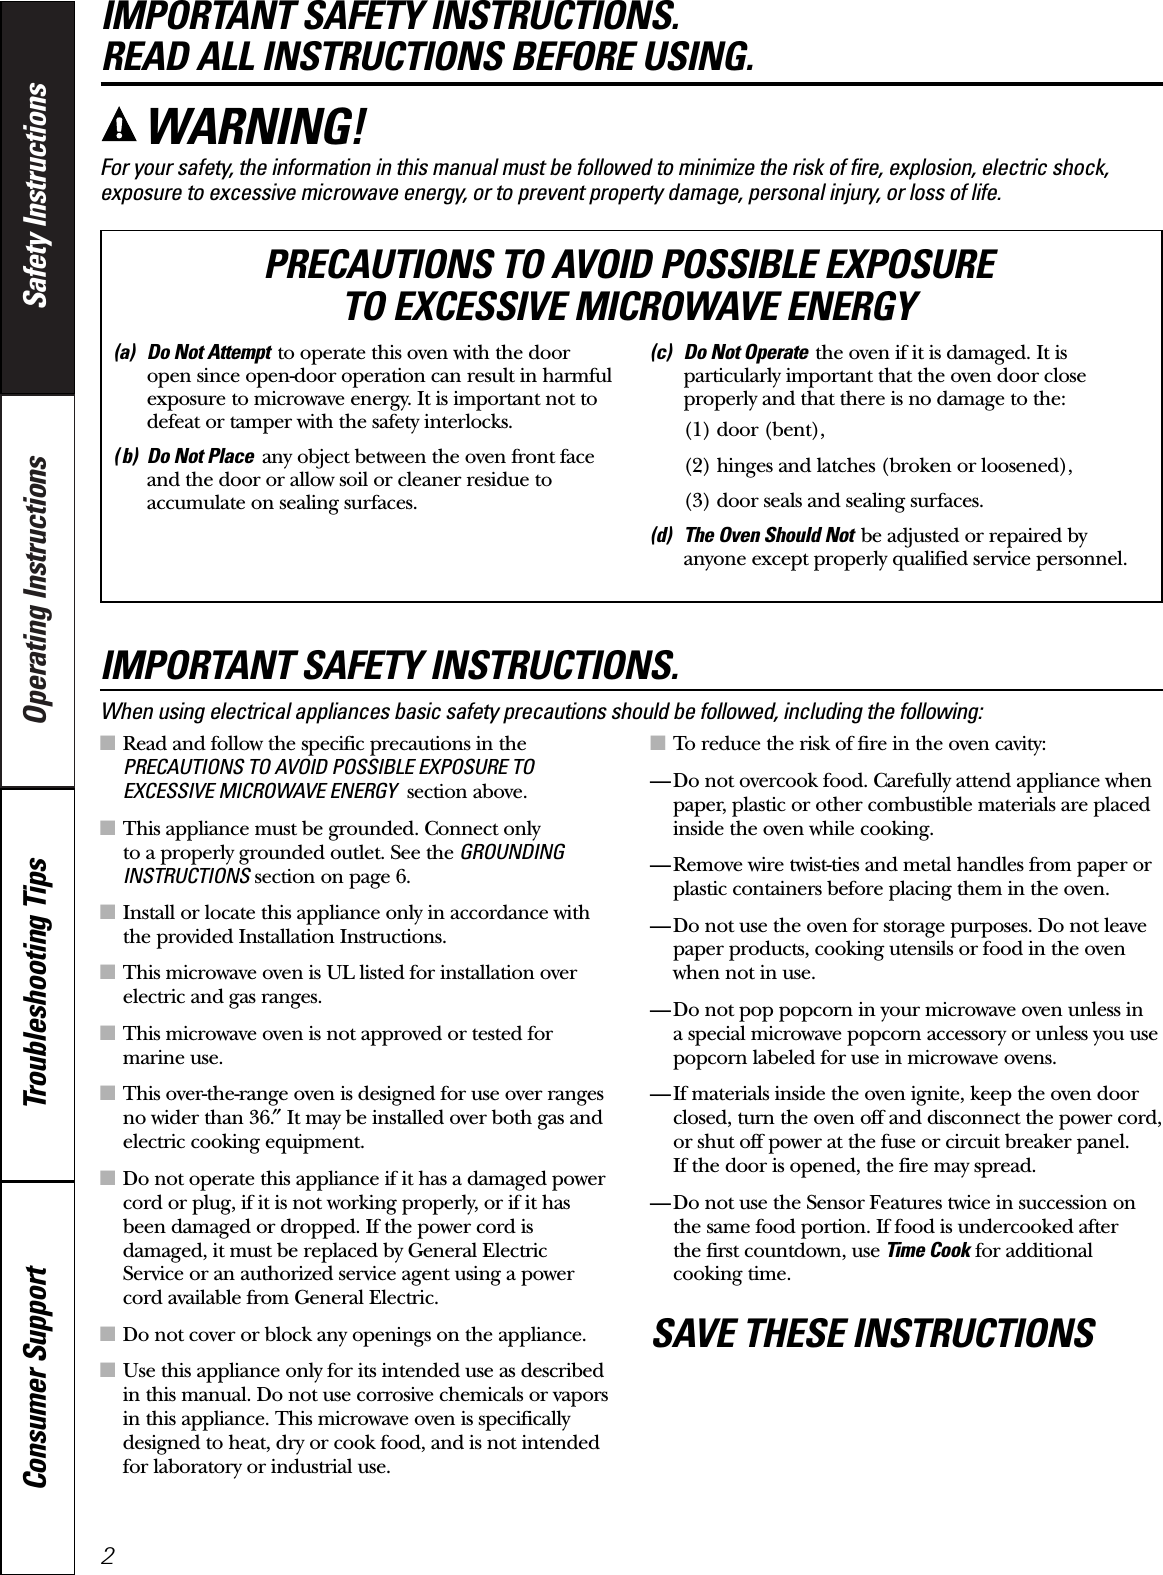 Operating Instructions Safety InstructionsConsumer Support Troubleshooting TipsIMPORTANT SAFETY INSTRUCTIONS. READ ALL INSTRUCTIONS BEFORE USING.IMPORTANT SAFETY INSTRUCTIONS.When using electrical appliances basic safety precautions should be followed, including the following:■Read and follow the specific precautions in thePRECAUTIONS TO AVOID POSSIBLE EXPOSURE TOEXCESSIVE MICROWAVE ENERGY section above.■This appliance must be grounded. Connect only to a properly grounded outlet. See the GROUNDINGINSTRUCTIONS section on page 6.■Install or locate this appliance only in accordance withthe provided Installation Instructions.■This microwave oven is UL listed for installation overelectric and gas ranges.■This microwave oven is not approved or tested formarine use.■This over-the-range oven is designed for use over rangesno wider than 36.″It may be installed over both gas andelectric cooking equipment.■Do not operate this appliance if it has a damaged powercord or plug, if it is not working properly, or if it hasbeen damaged or dropped. If the power cord isdamaged, it must be replaced by General ElectricService or an authorized service agent using a powercord available from General Electric.■Do not cover or block any openings on the appliance.■Use this appliance only for its intended use as describedin this manual. Do not use corrosive chemicals or vaporsin this appliance. This microwave oven is specificallydesigned to heat, dry or cook food, and is not intendedfor laboratory or industrial use.■To reduce the risk of fire in the oven cavity:— Do not overcook food. Carefully attend appliance whenpaper, plastic or other combustible materials are placedinside the oven while cooking.— Remove wire twist-ties and metal handles from paper orplastic containers before placing them in the oven.— Do not use the oven for storage purposes. Do not leavepaper products, cooking utensils or food in the ovenwhen not in use.— Do not pop popcorn in your microwave oven unless in a special microwave popcorn accessory or unless you usepopcorn labeled for use in microwave ovens.— If materials inside the oven ignite, keep the oven doorclosed, turn the oven off and disconnect the power cord,or shut off power at the fuse or circuit breaker panel. If the door is opened, the fire may spread.— Do not use the Sensor Features twice in succession onthe same food portion. If food is undercooked after the first countdown, use Time Cook for additionalcooking time.SAVE THESE INSTRUCTIONSWARNING!For your safety, the information in this manual must be followed to minimize the risk of fire, explosion, electric shock,exposure to excessive microwave energy, or to prevent property damage, personal injury, or loss of life.(a) Do Not Attempt to operate this oven with the dooropen since open-door operation can result in harmfulexposure to microwave energy. It is important not todefeat or tamper with the safety interlocks.( b) Do Not Place any object between the oven front faceand the door or allow soil or cleaner residue toaccumulate on sealing surfaces.(c) Do Not Operate the oven if it is damaged. It isparticularly important that the oven door closeproperly and that there is no damage to the:(1) door (bent),(2) hinges and latches (broken or loosened),(3) door seals and sealing surfaces.(d) The Oven Should Not be adjusted or repaired byanyone except properly qualified service personnel.PRECAUTIONS TO AVOID POSSIBLE EXPOSURE TO EXCESSIVE MICROWAVE ENERGY2